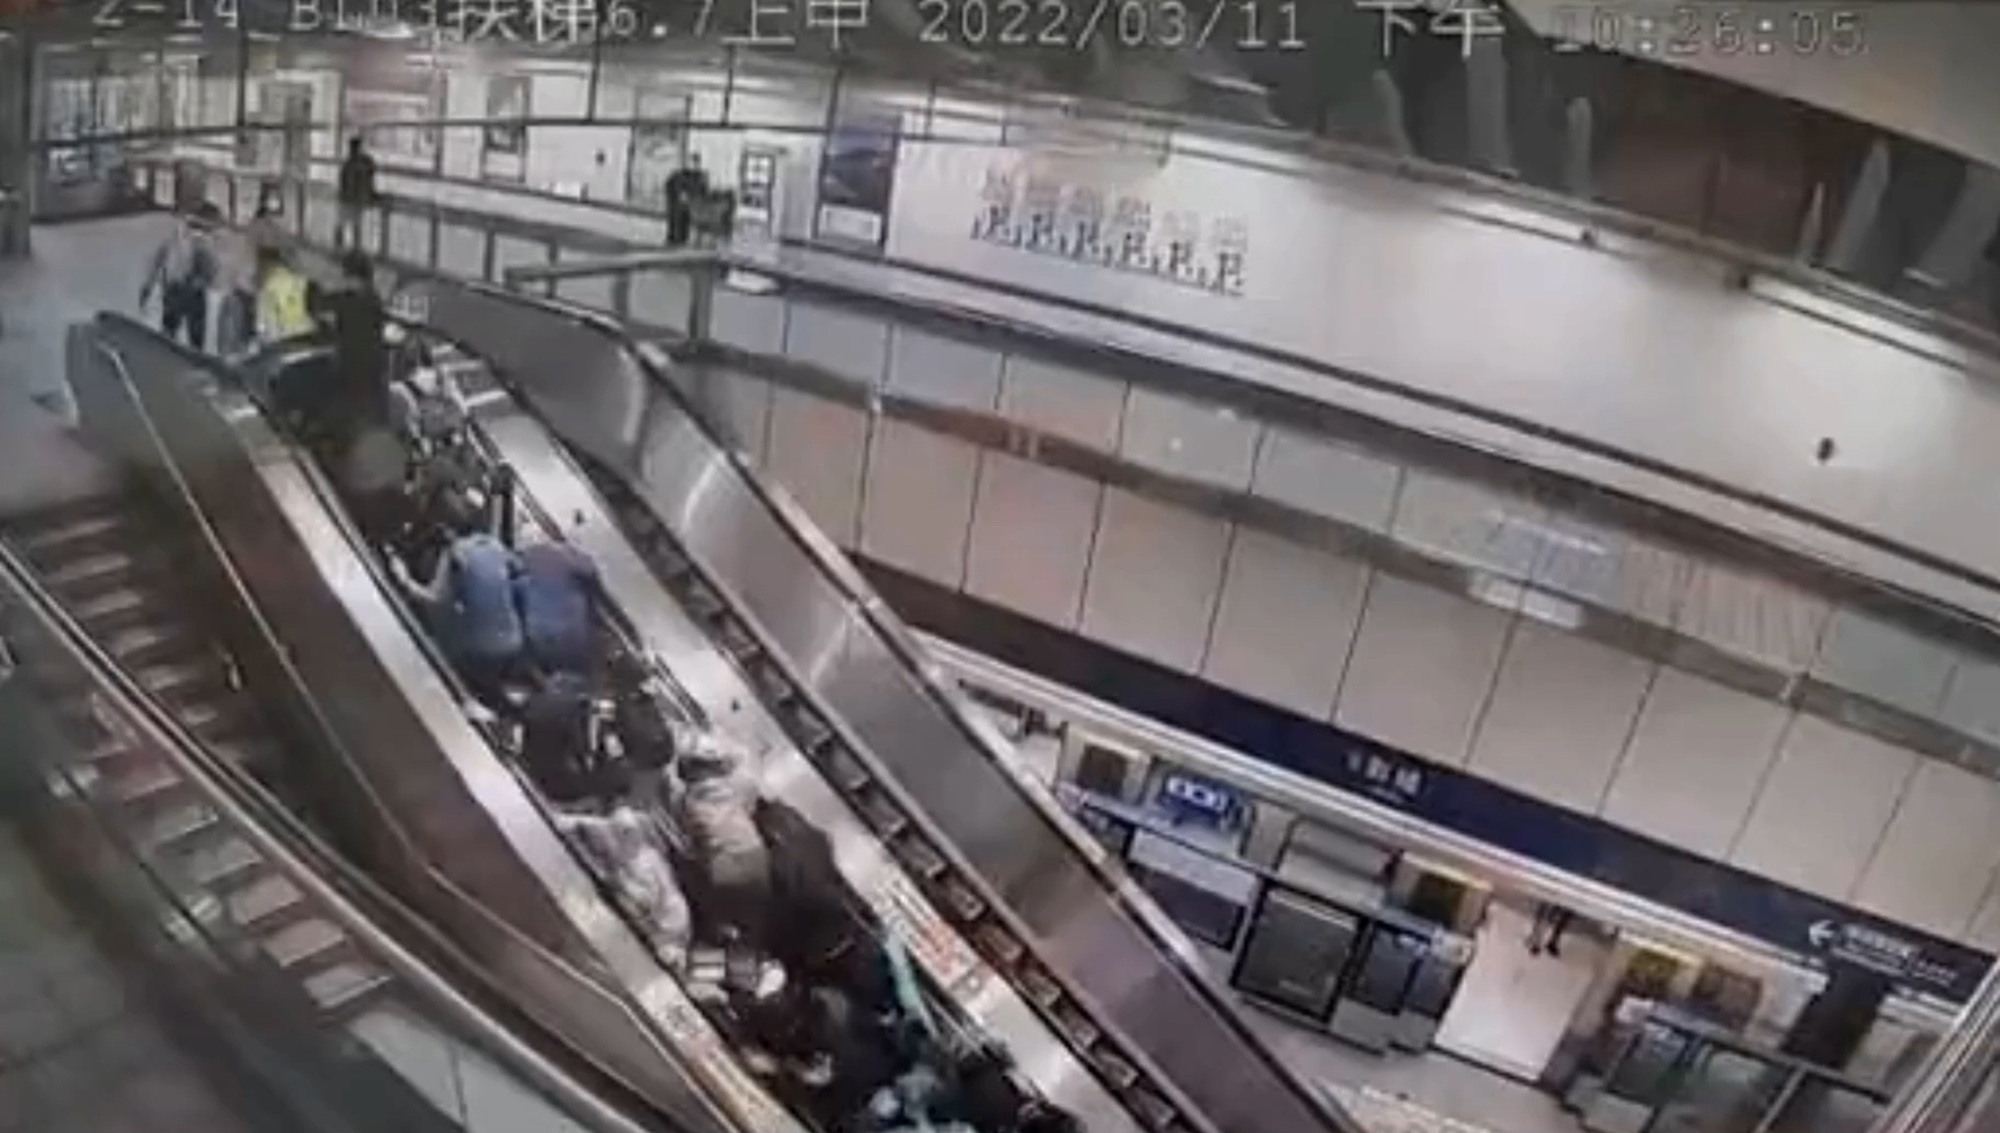 Read more about the article Mass Pile Up At Bottom Of Escalator After Brakes Fail And It Whizzes Backwards